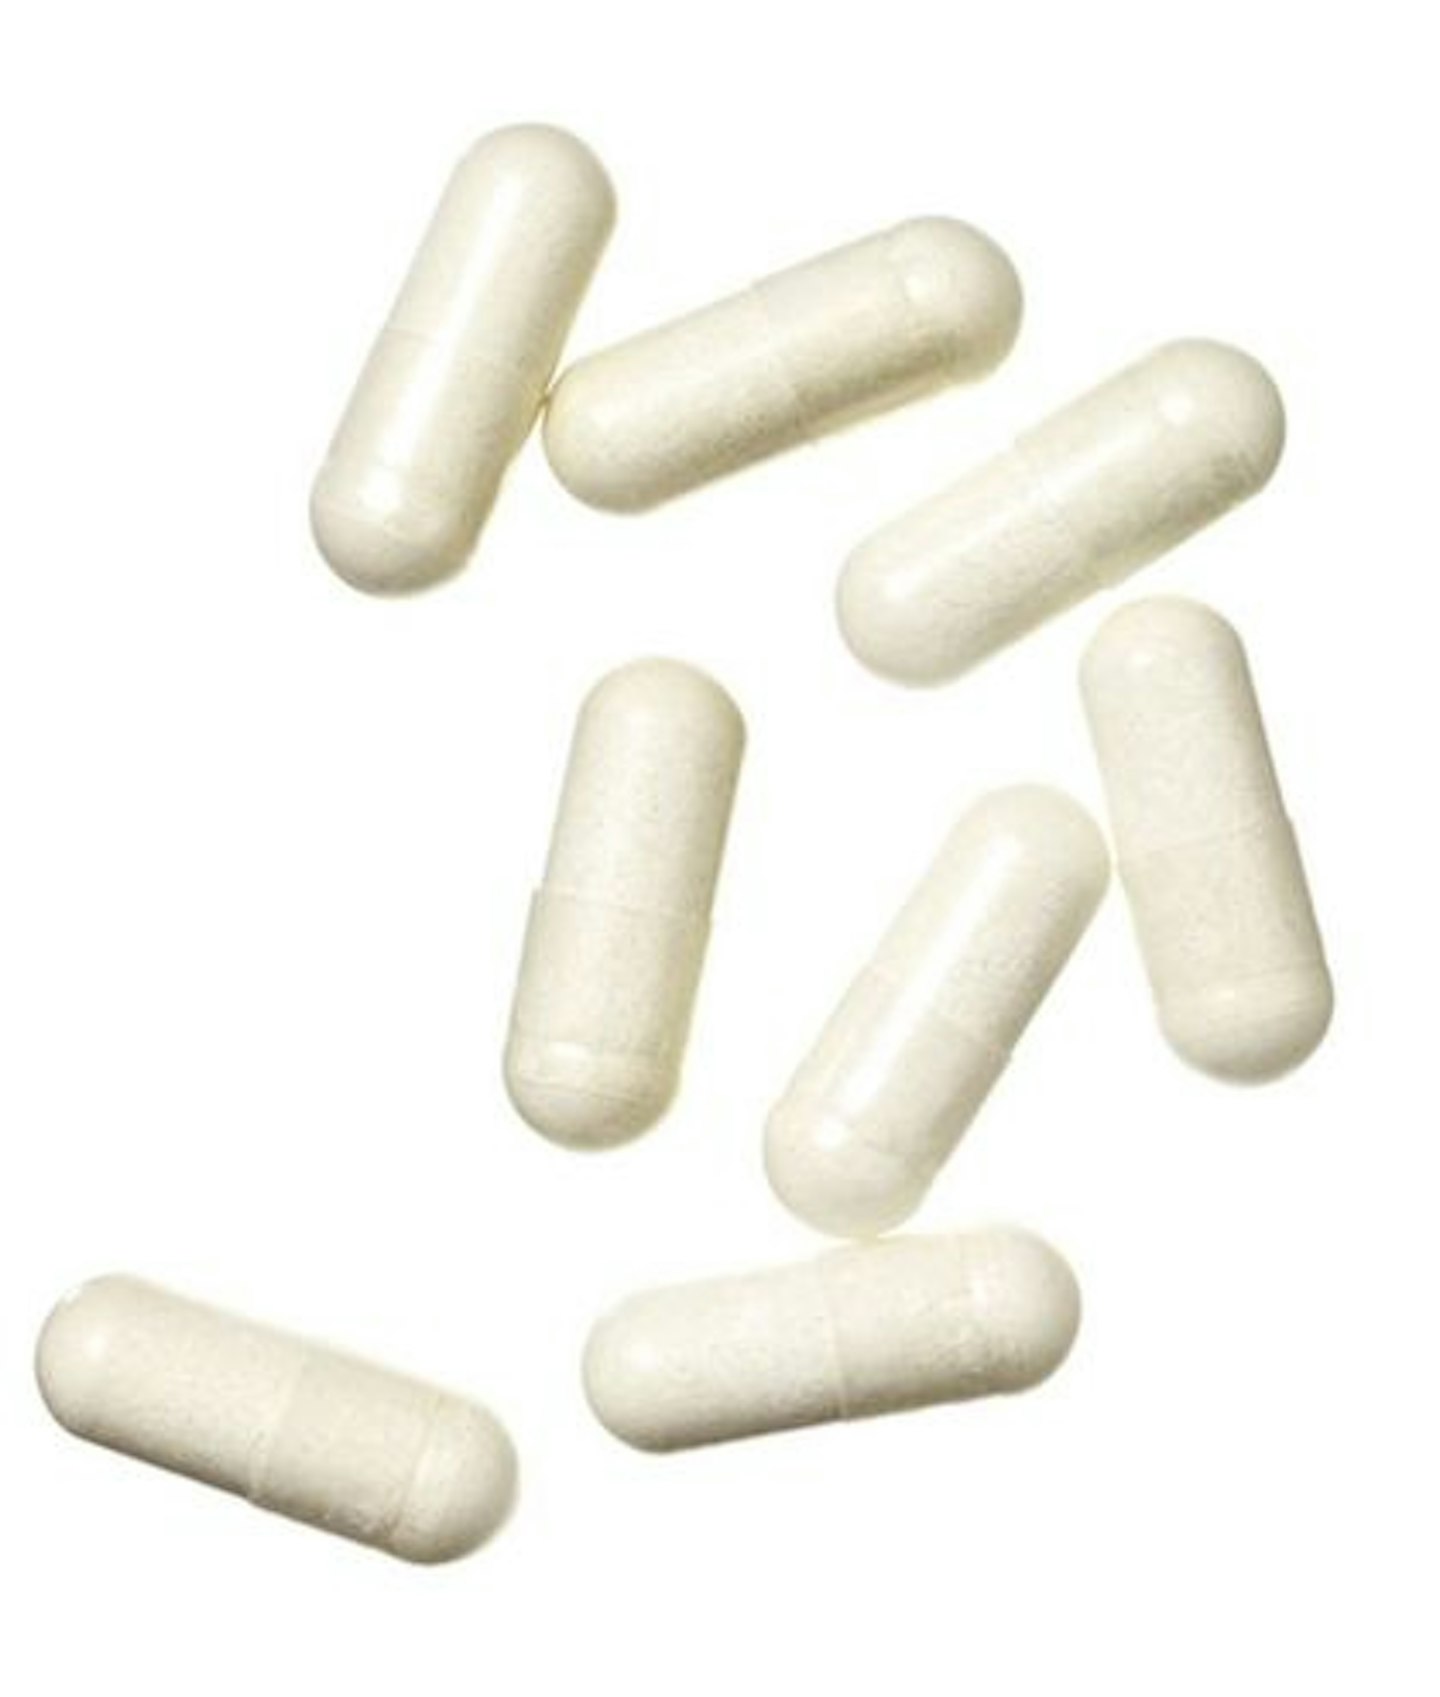 Advance nail science capsules